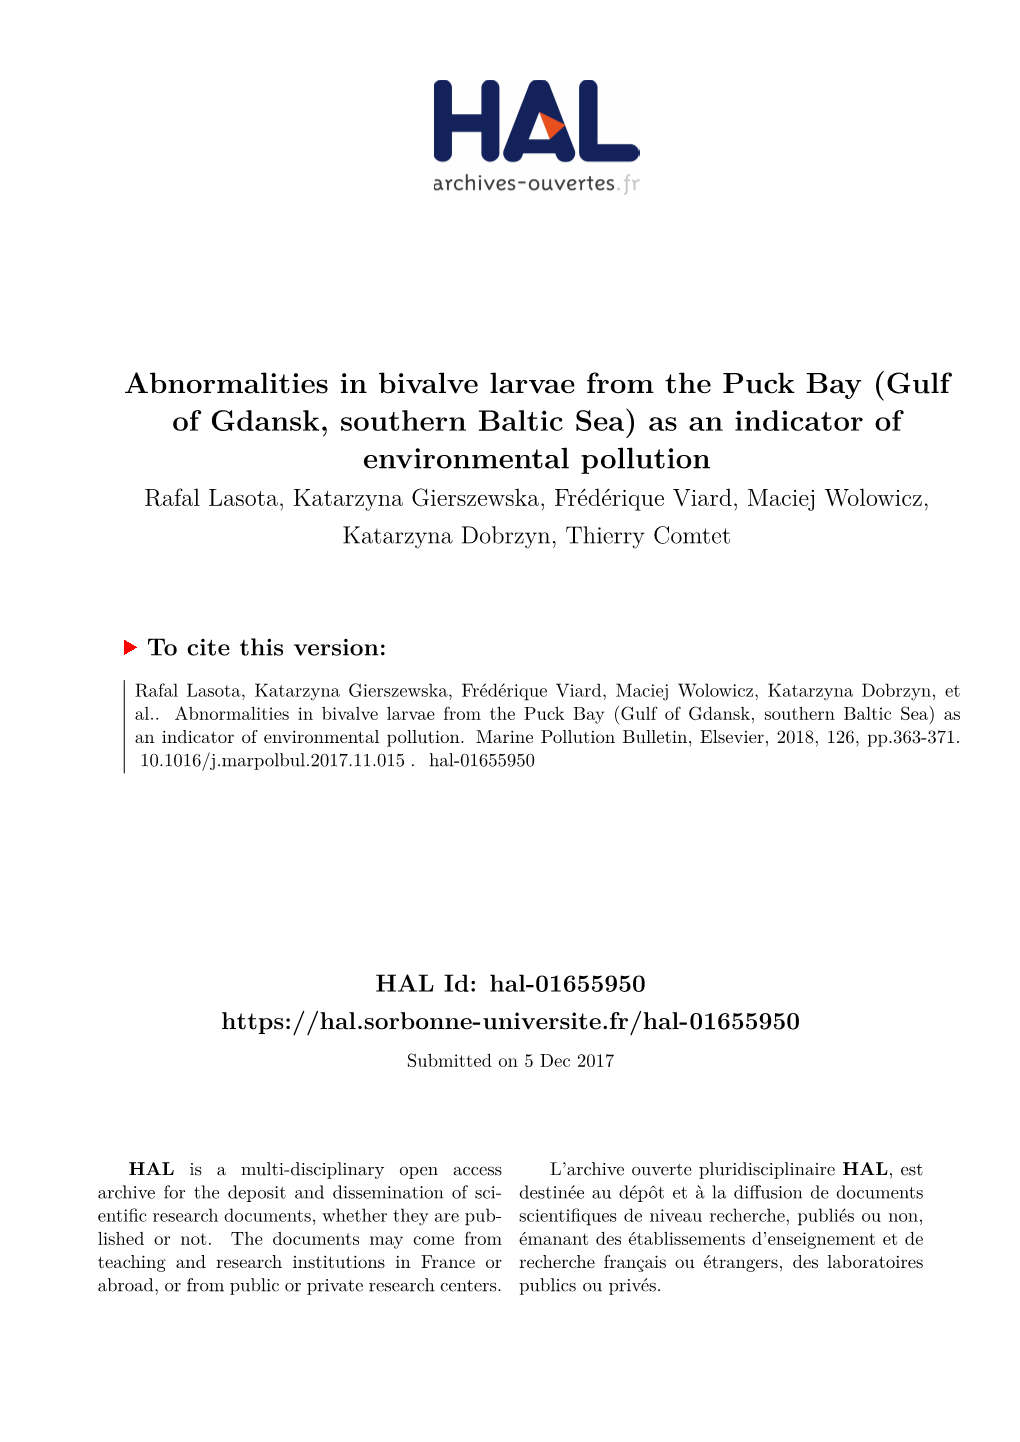 Abnormalities in Bivalve Larvae from the Puck